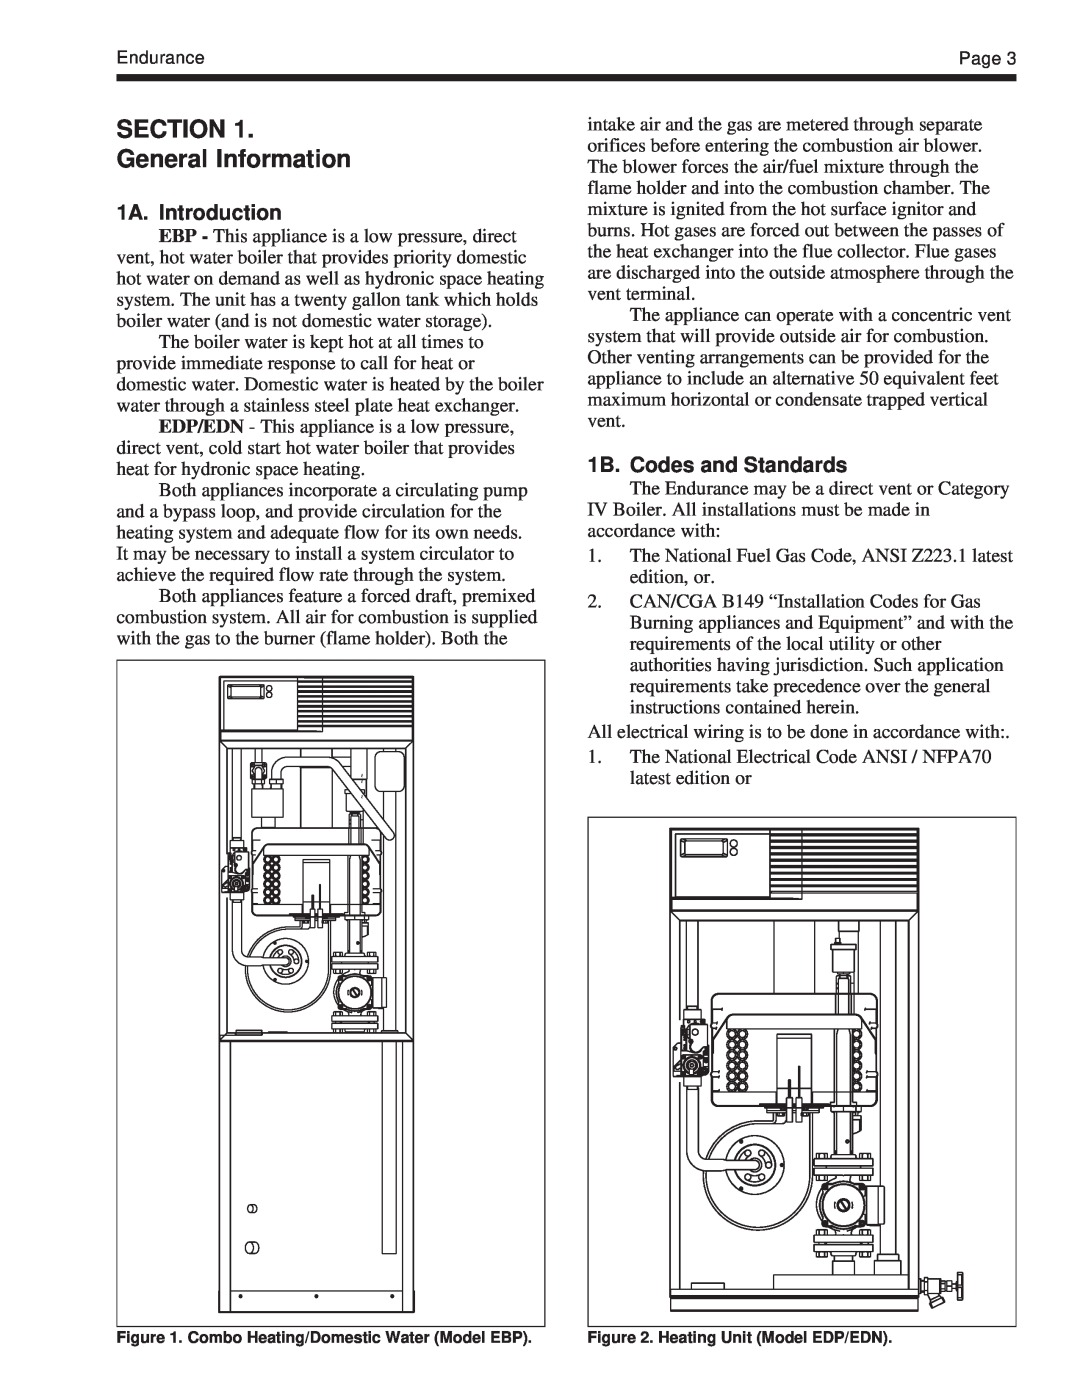 Whirlpool EDP/EDN warranty SECTION General Information, 1A. Introduction, 1B. Codes and Standards 